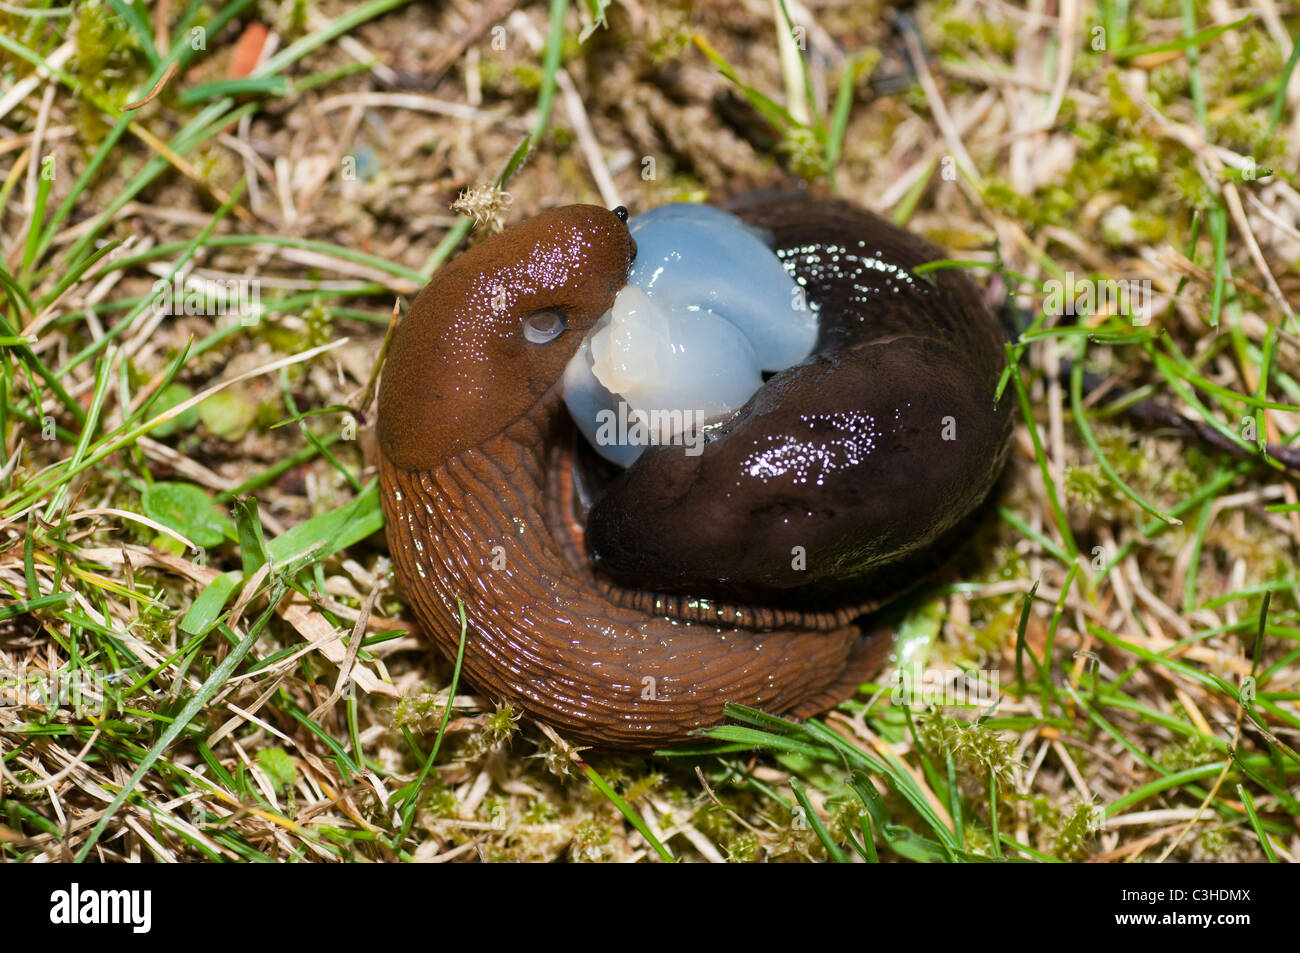 Large red slugs (Arion ater) mating Stock Photo